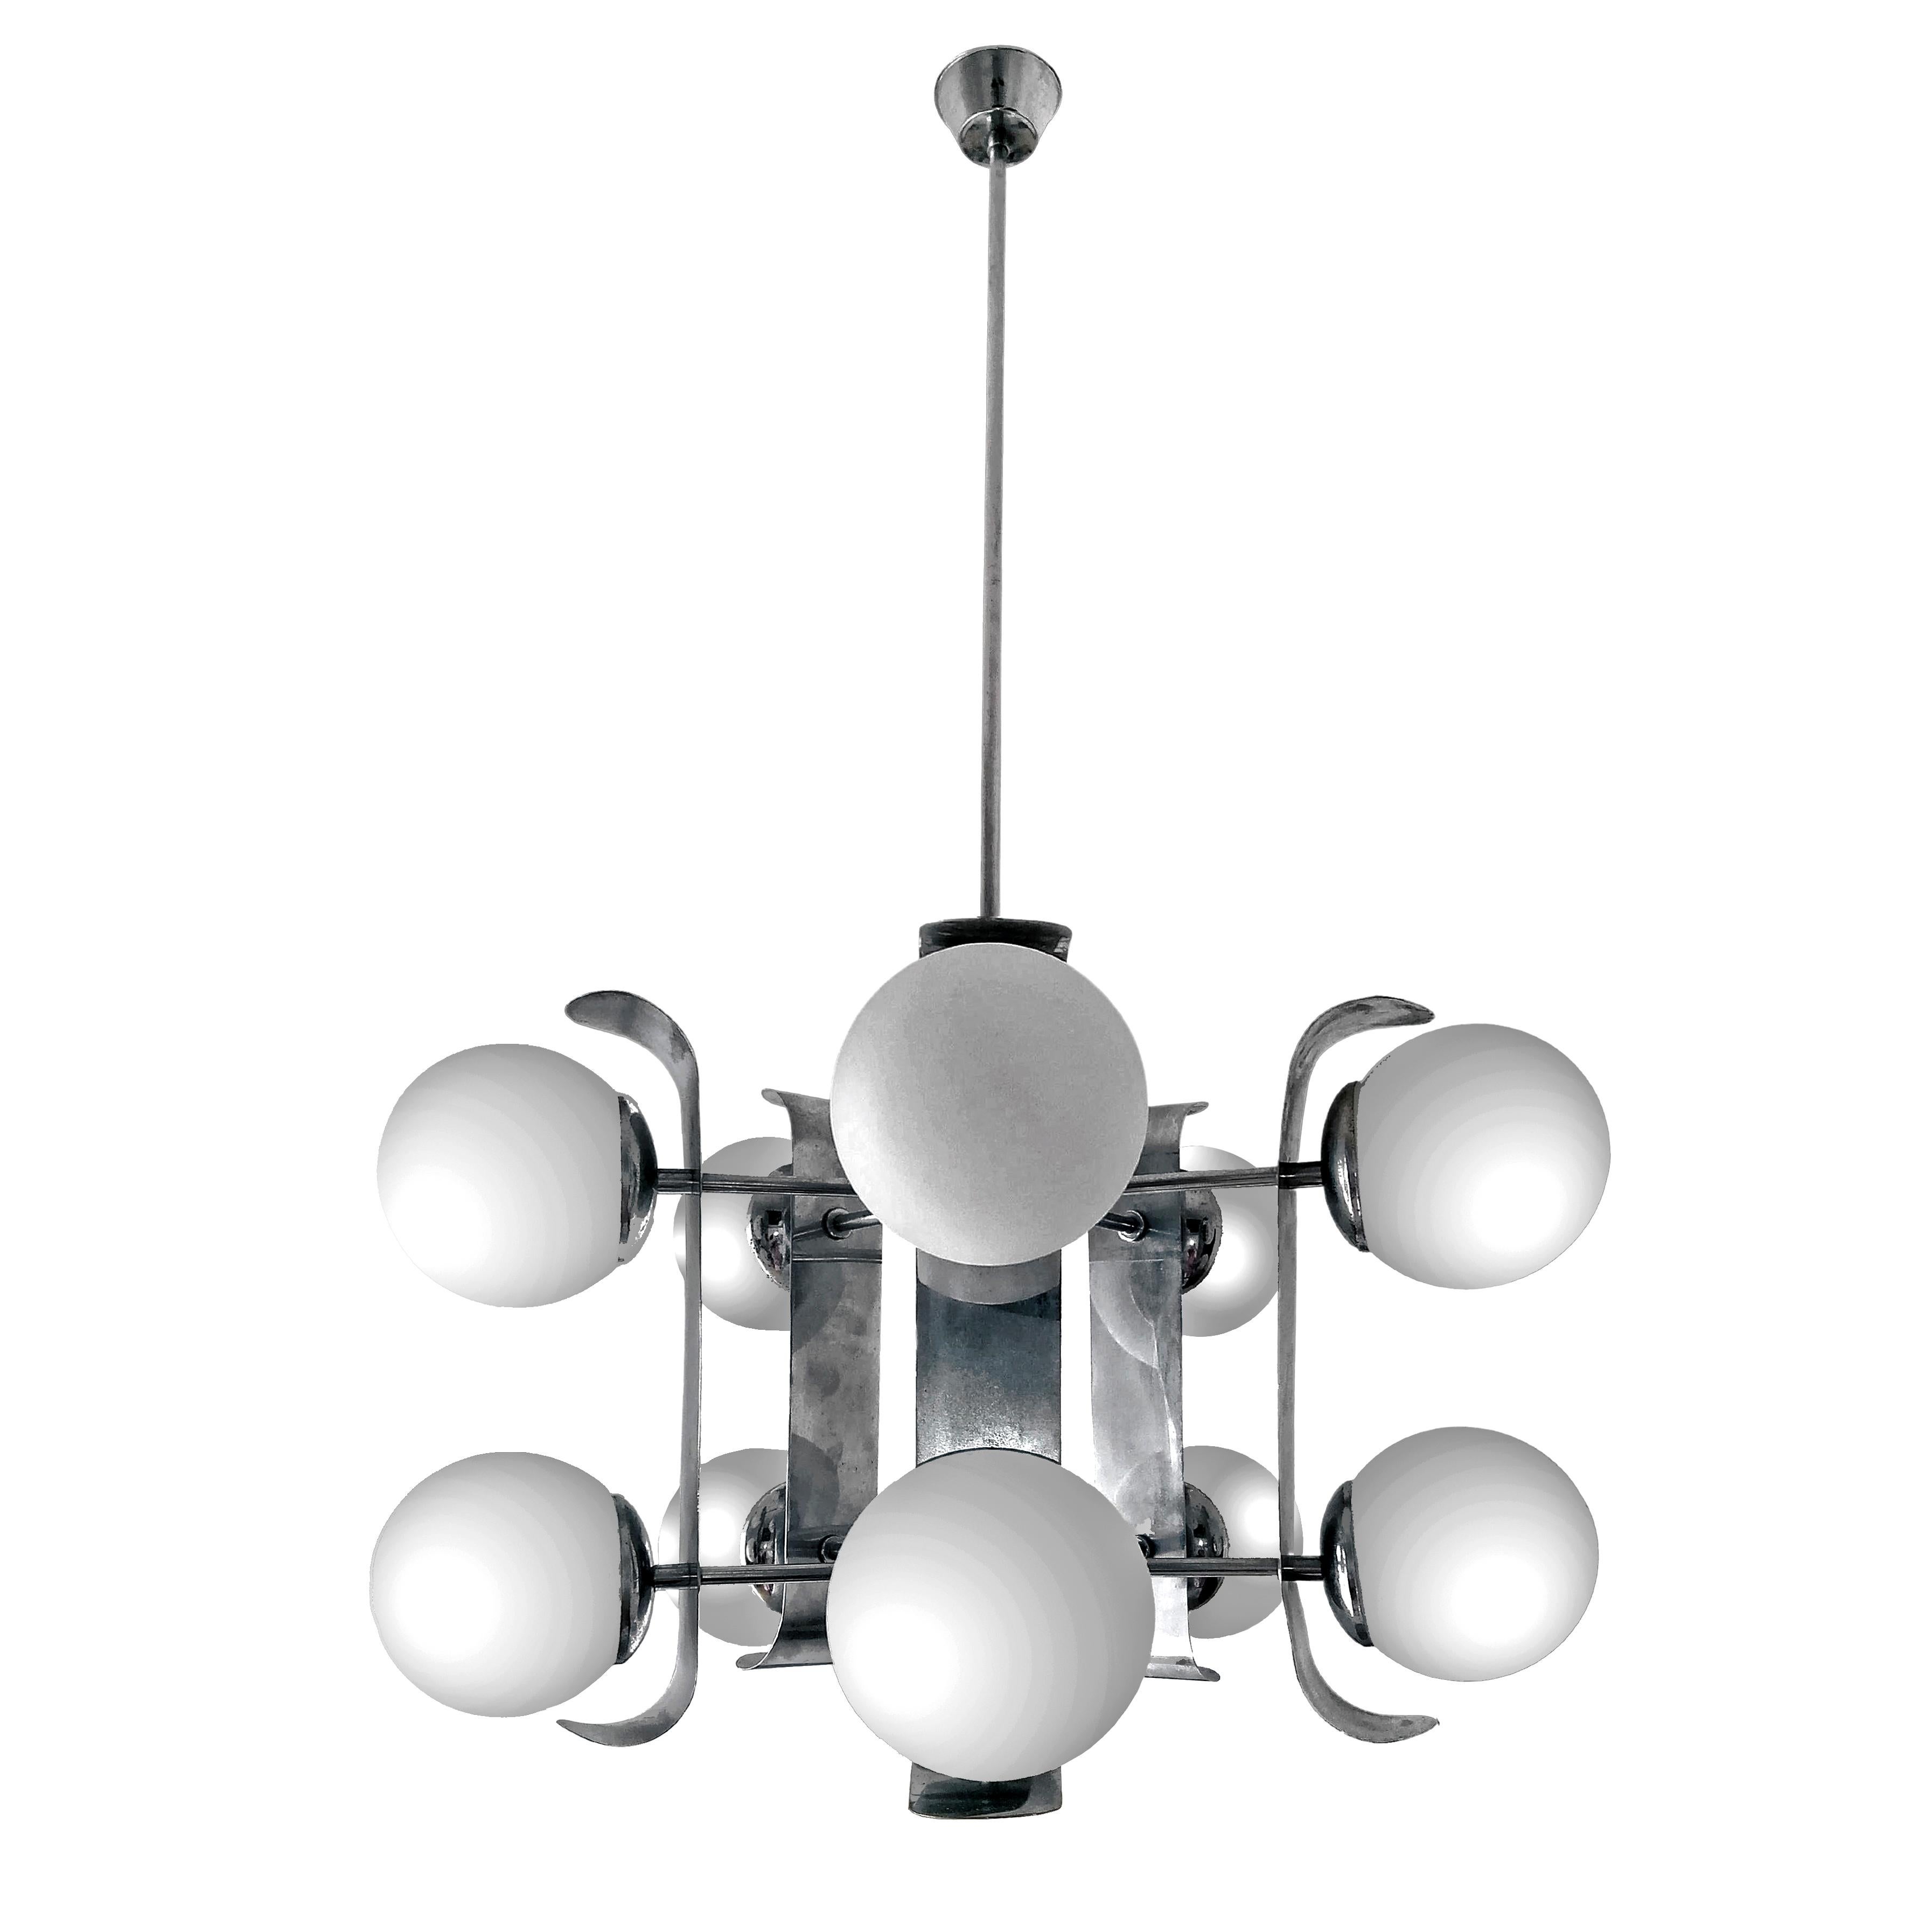 Vintage midcentury Italian chrome atomic Space Age Sputnik orbit chandelier with frosted opaline glass globes
Dimensions
Height: 43.31 in. (110 cm)
Diameter: 23.63 in. (60 cm)
10-light bulbs E-14
Good working condition 
Assembly required.
   